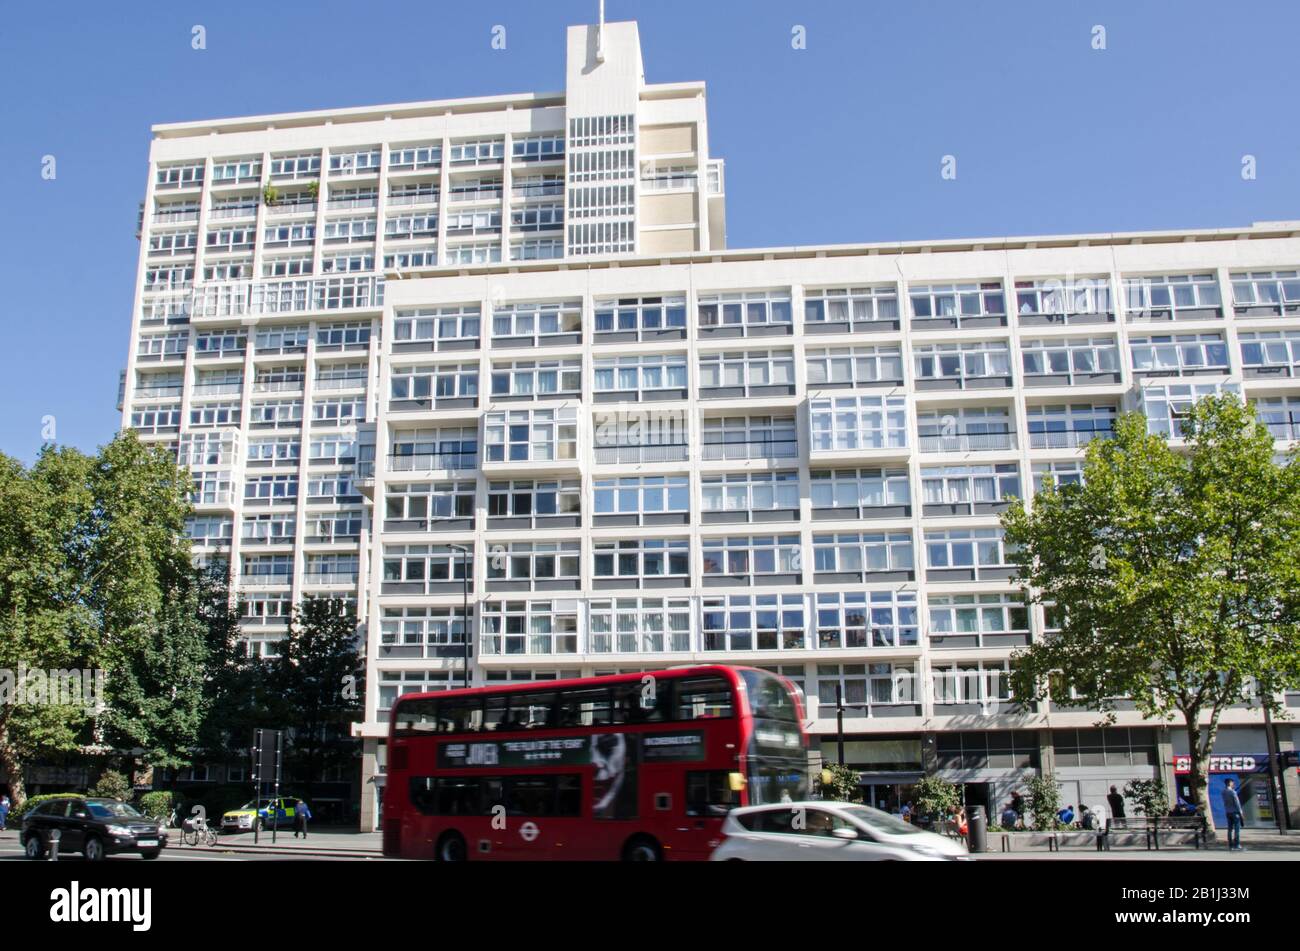 London, UK - September 21, 2019: View of the Erno Goldfinger designed Metro Central Heights at Elephant and Castle, Southwark, London.  Now used as ap Stock Photo